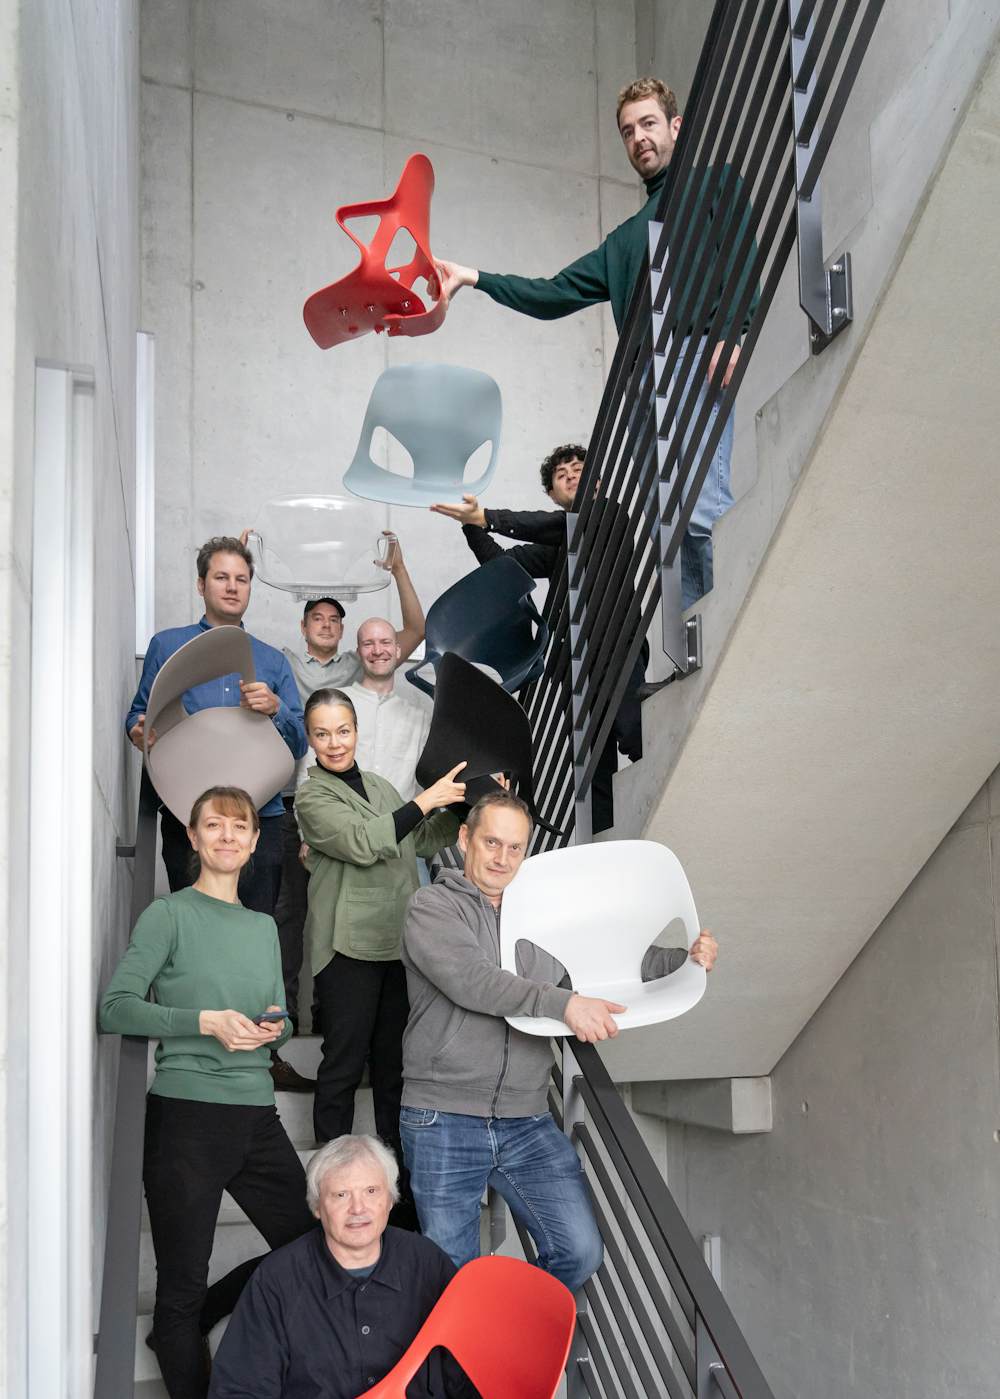 The Studio 7.5 design team standing together in a group in a stairwell.